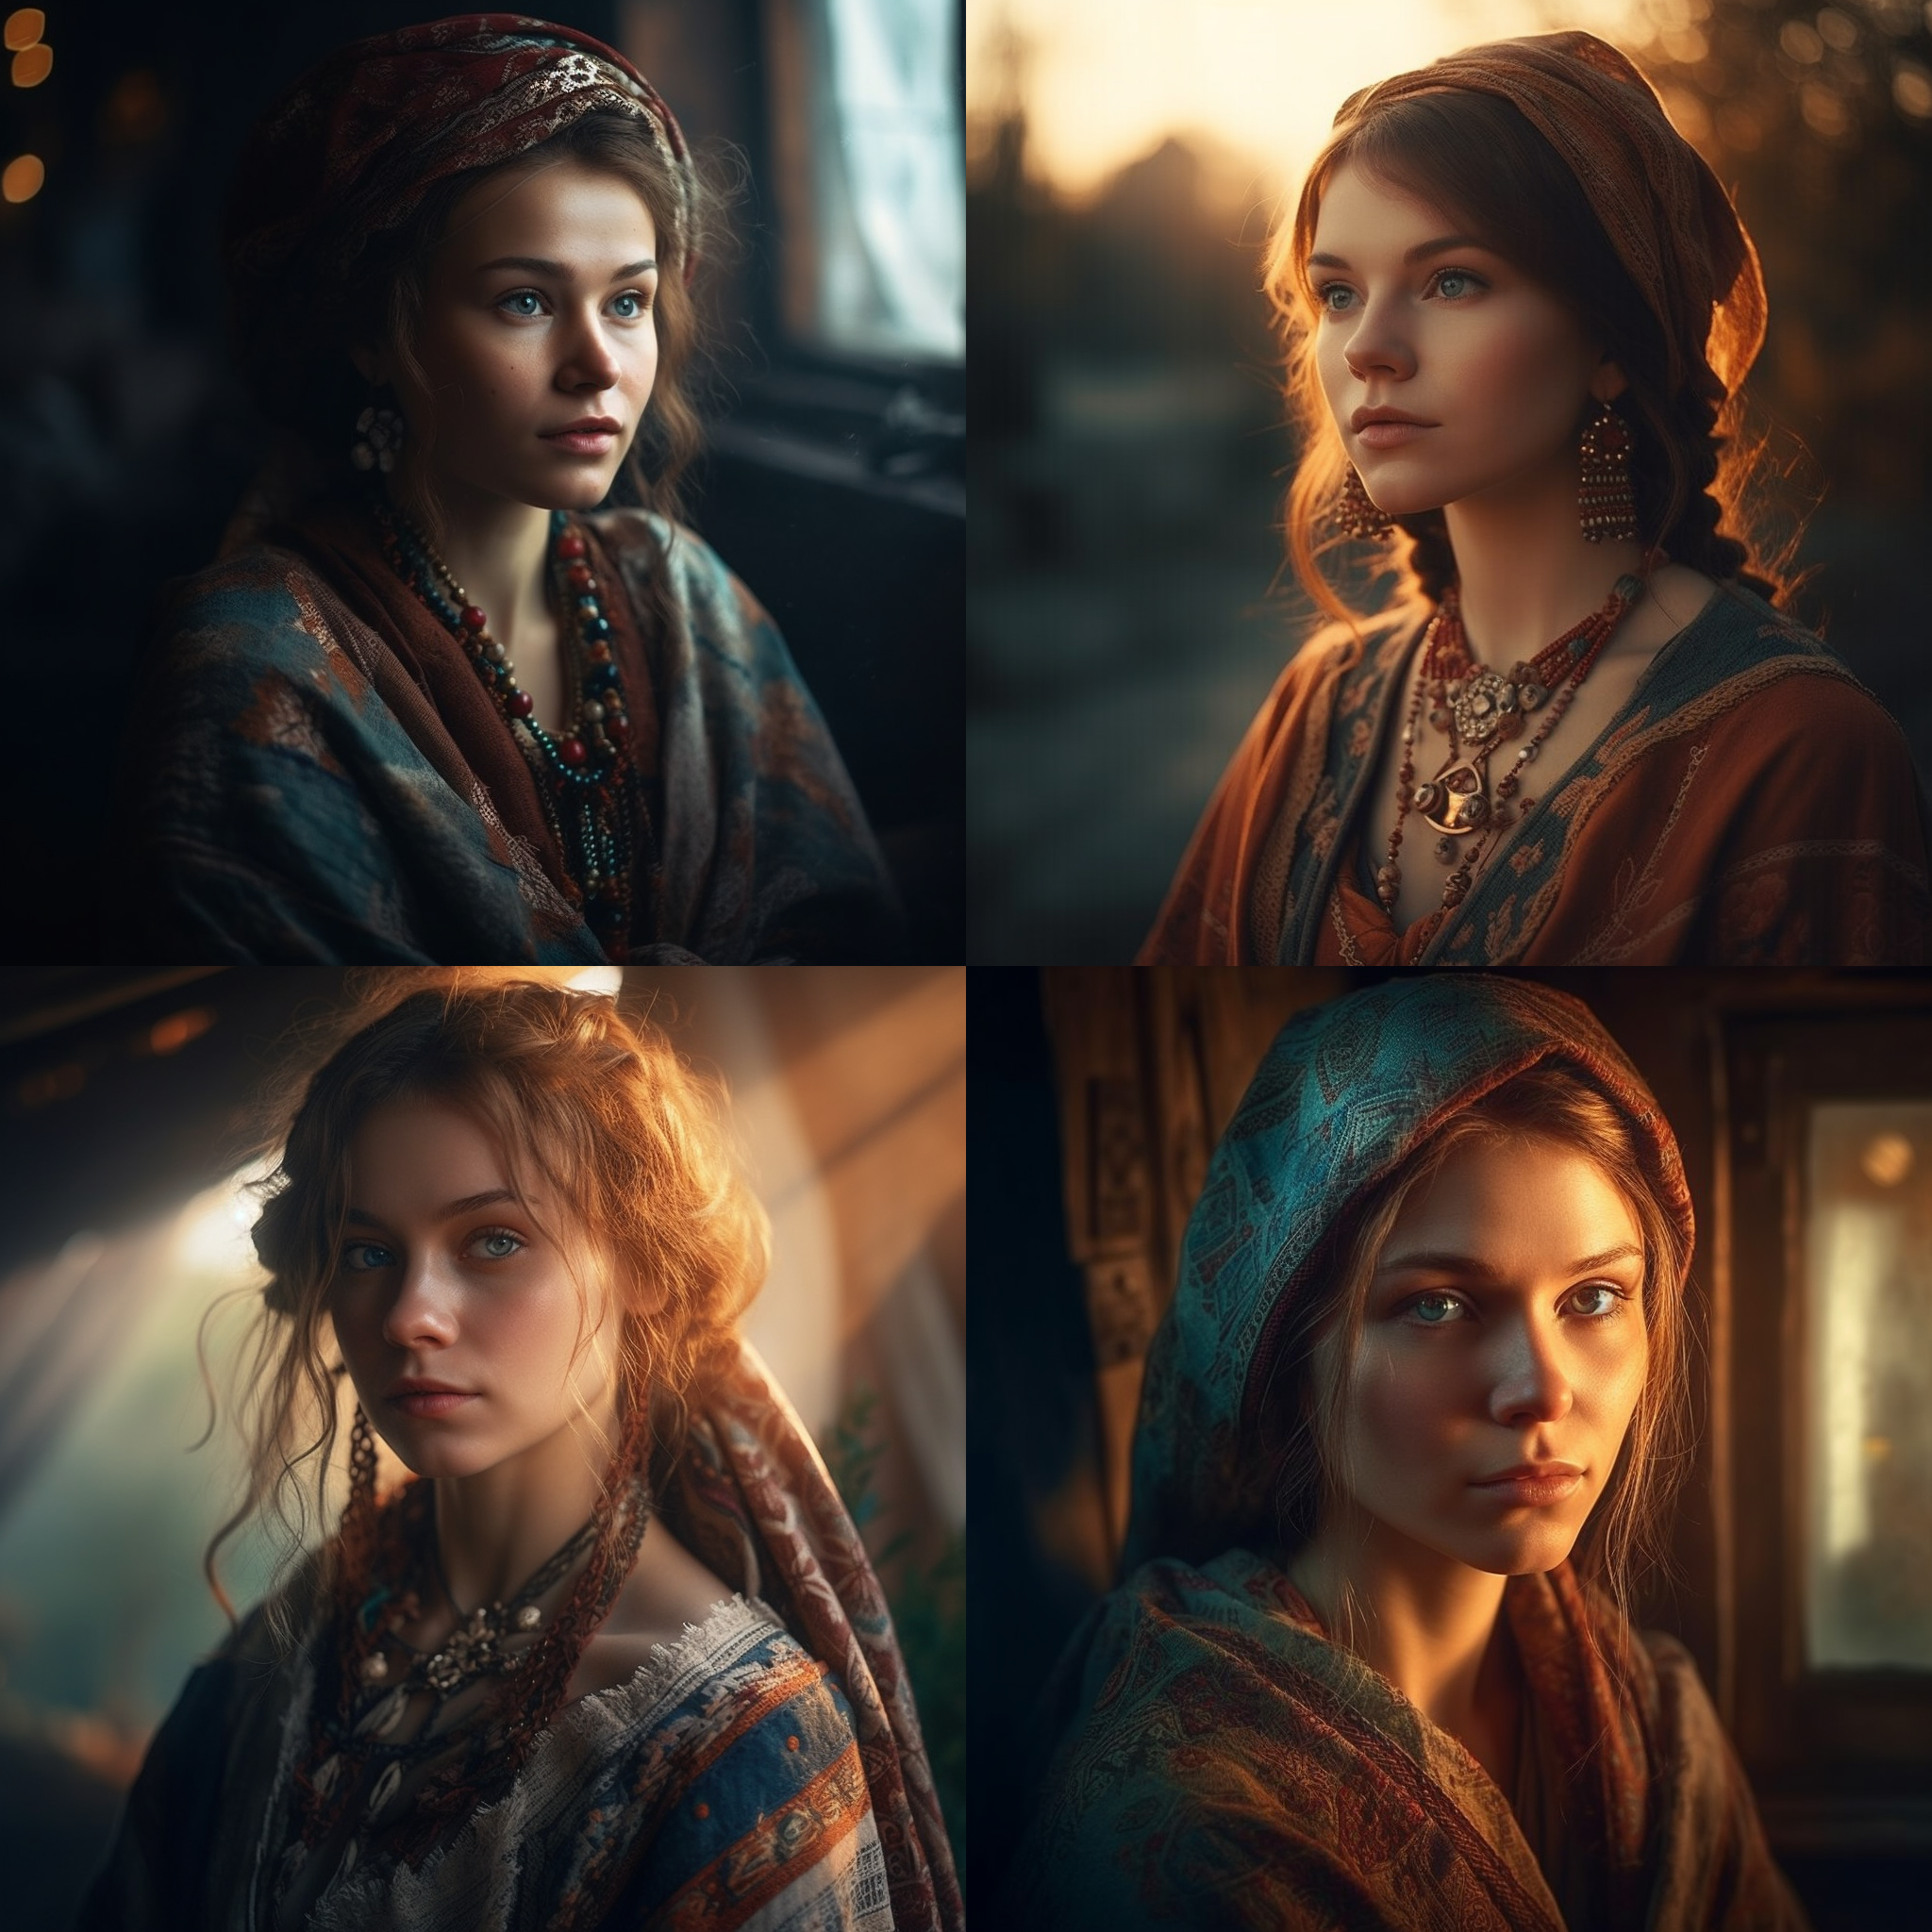 meowithai character beautiful Russian woman Dawn lighting 96ca93d5 6a38 4c05 9a8c 8ab5237bb863